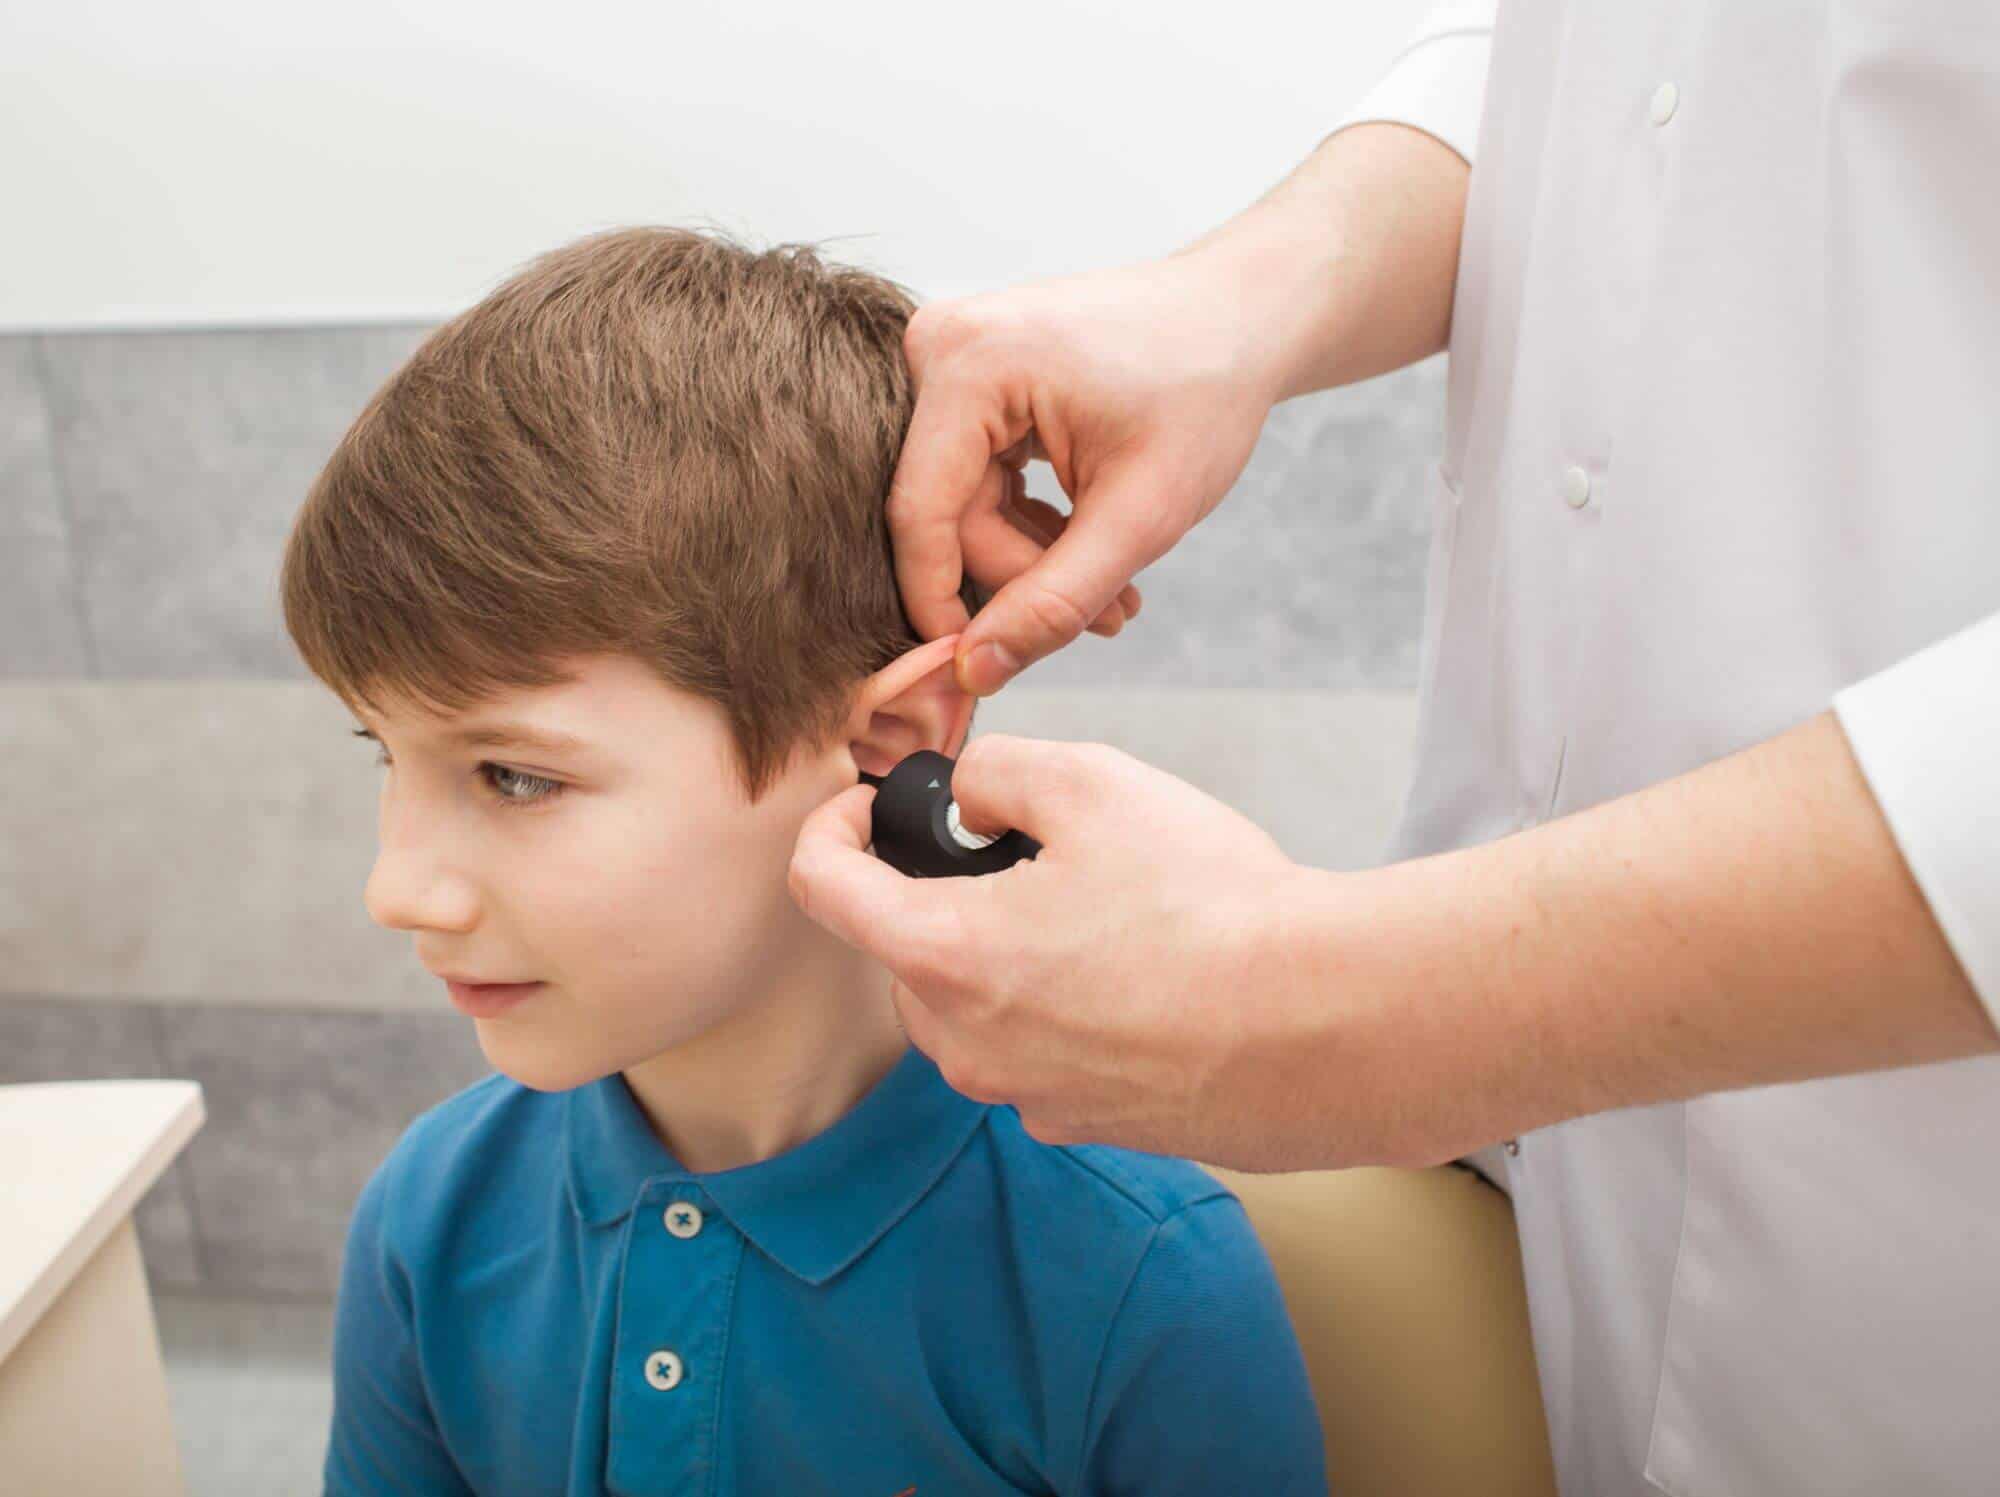 Featured image for “Hearing Loss May Cause Reading Problems in Children”